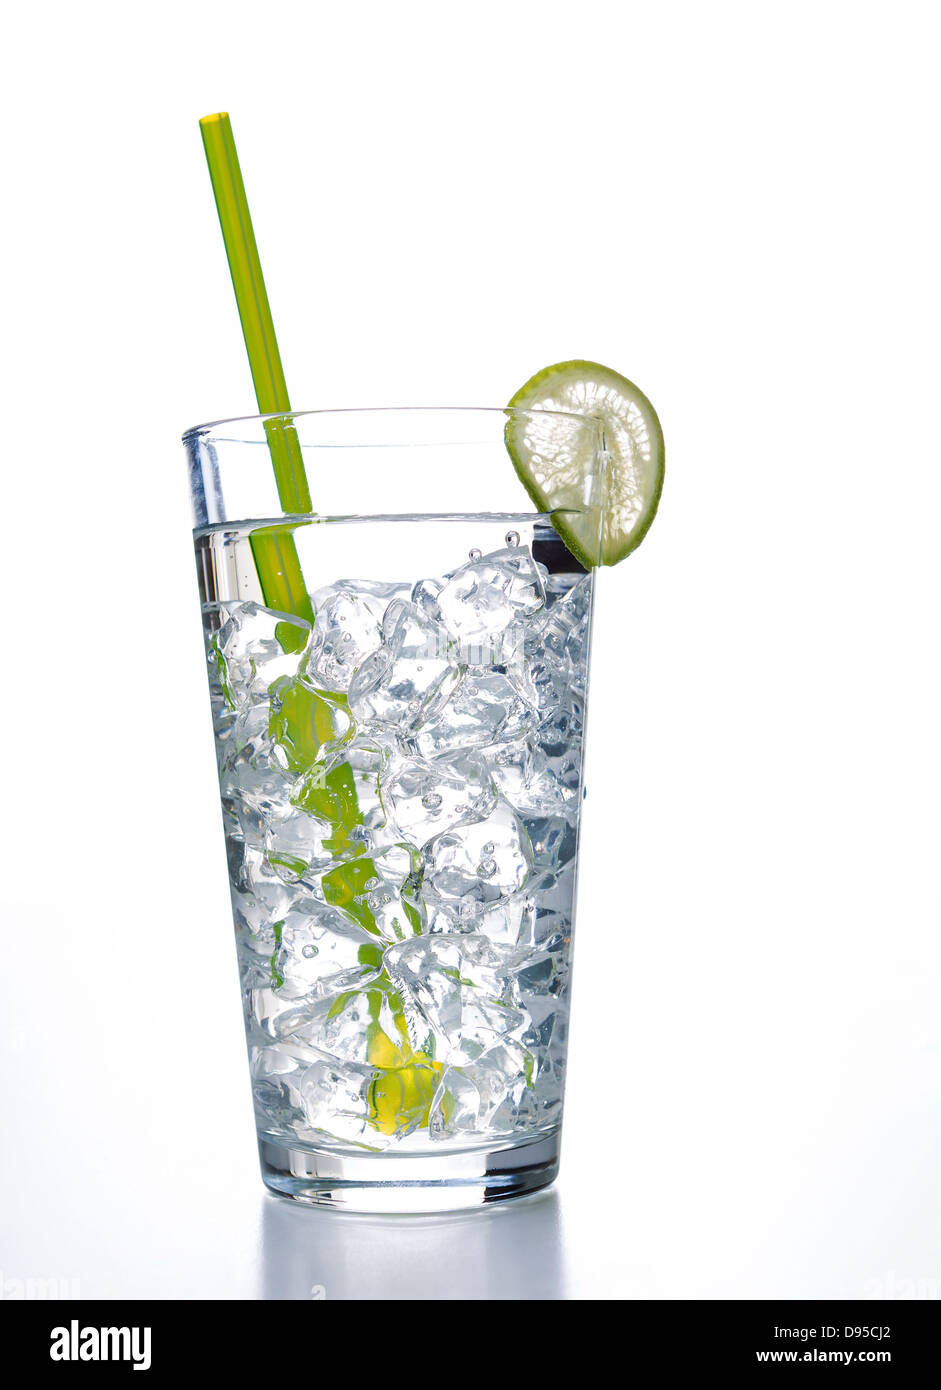 Vertical photo of a tall glass of water with ice cubes, slice of lime and a green straw on a white background Stock Photo